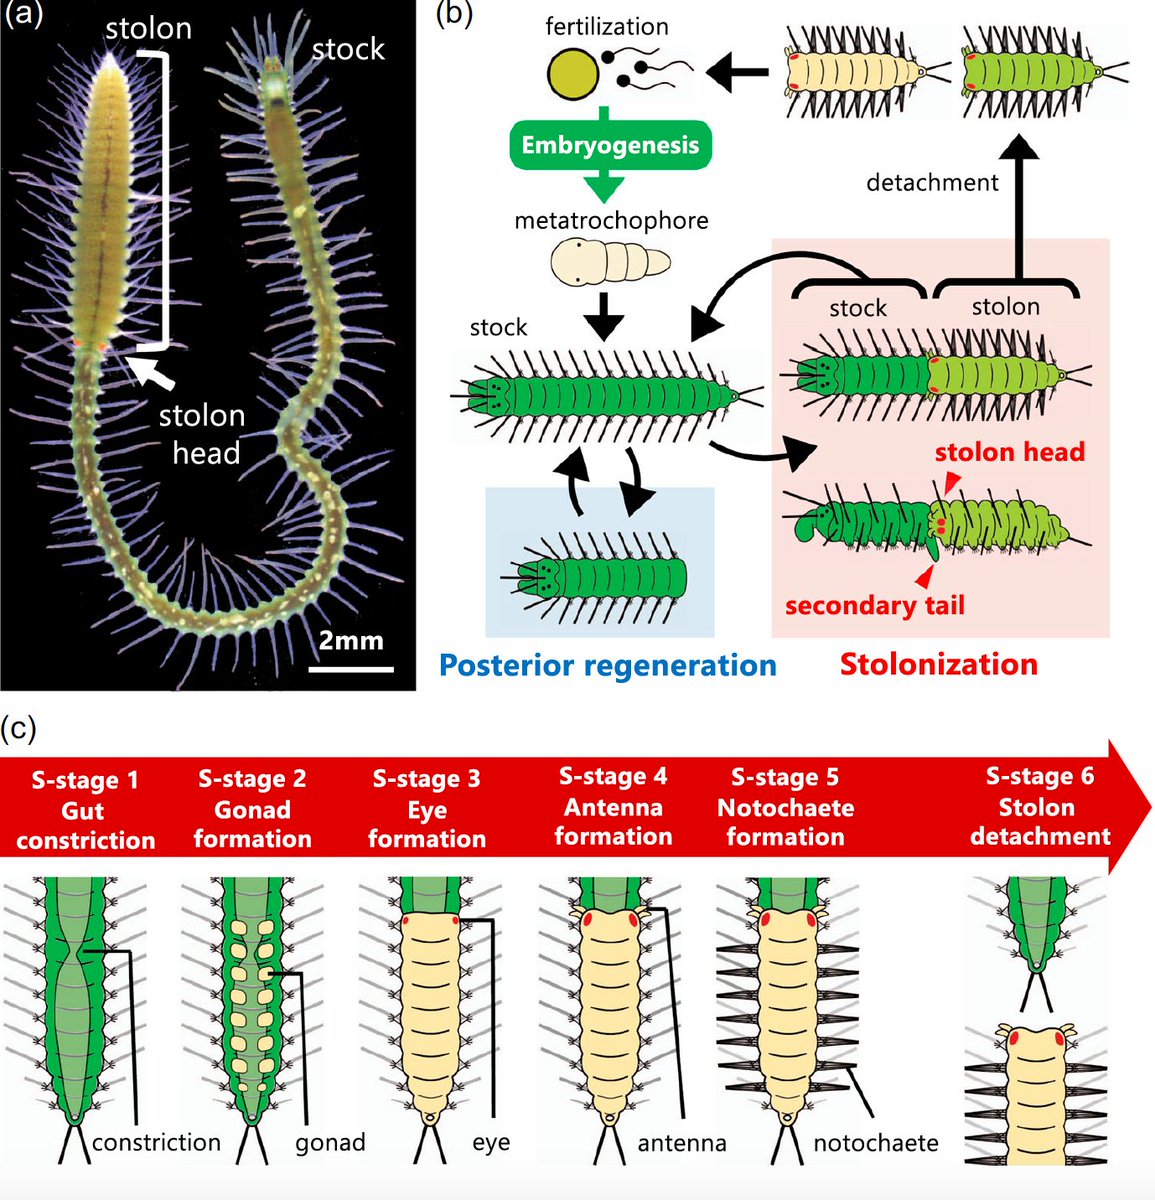 Our latest research is out: Secondary tail formation during stolonization in Japanese green syllid, Megasyllis nipponica. Here we analyze and compare stolons (reproductive units formed at post ends) with simultaneous second tail formation. doi.org/10.1111/ede.12…